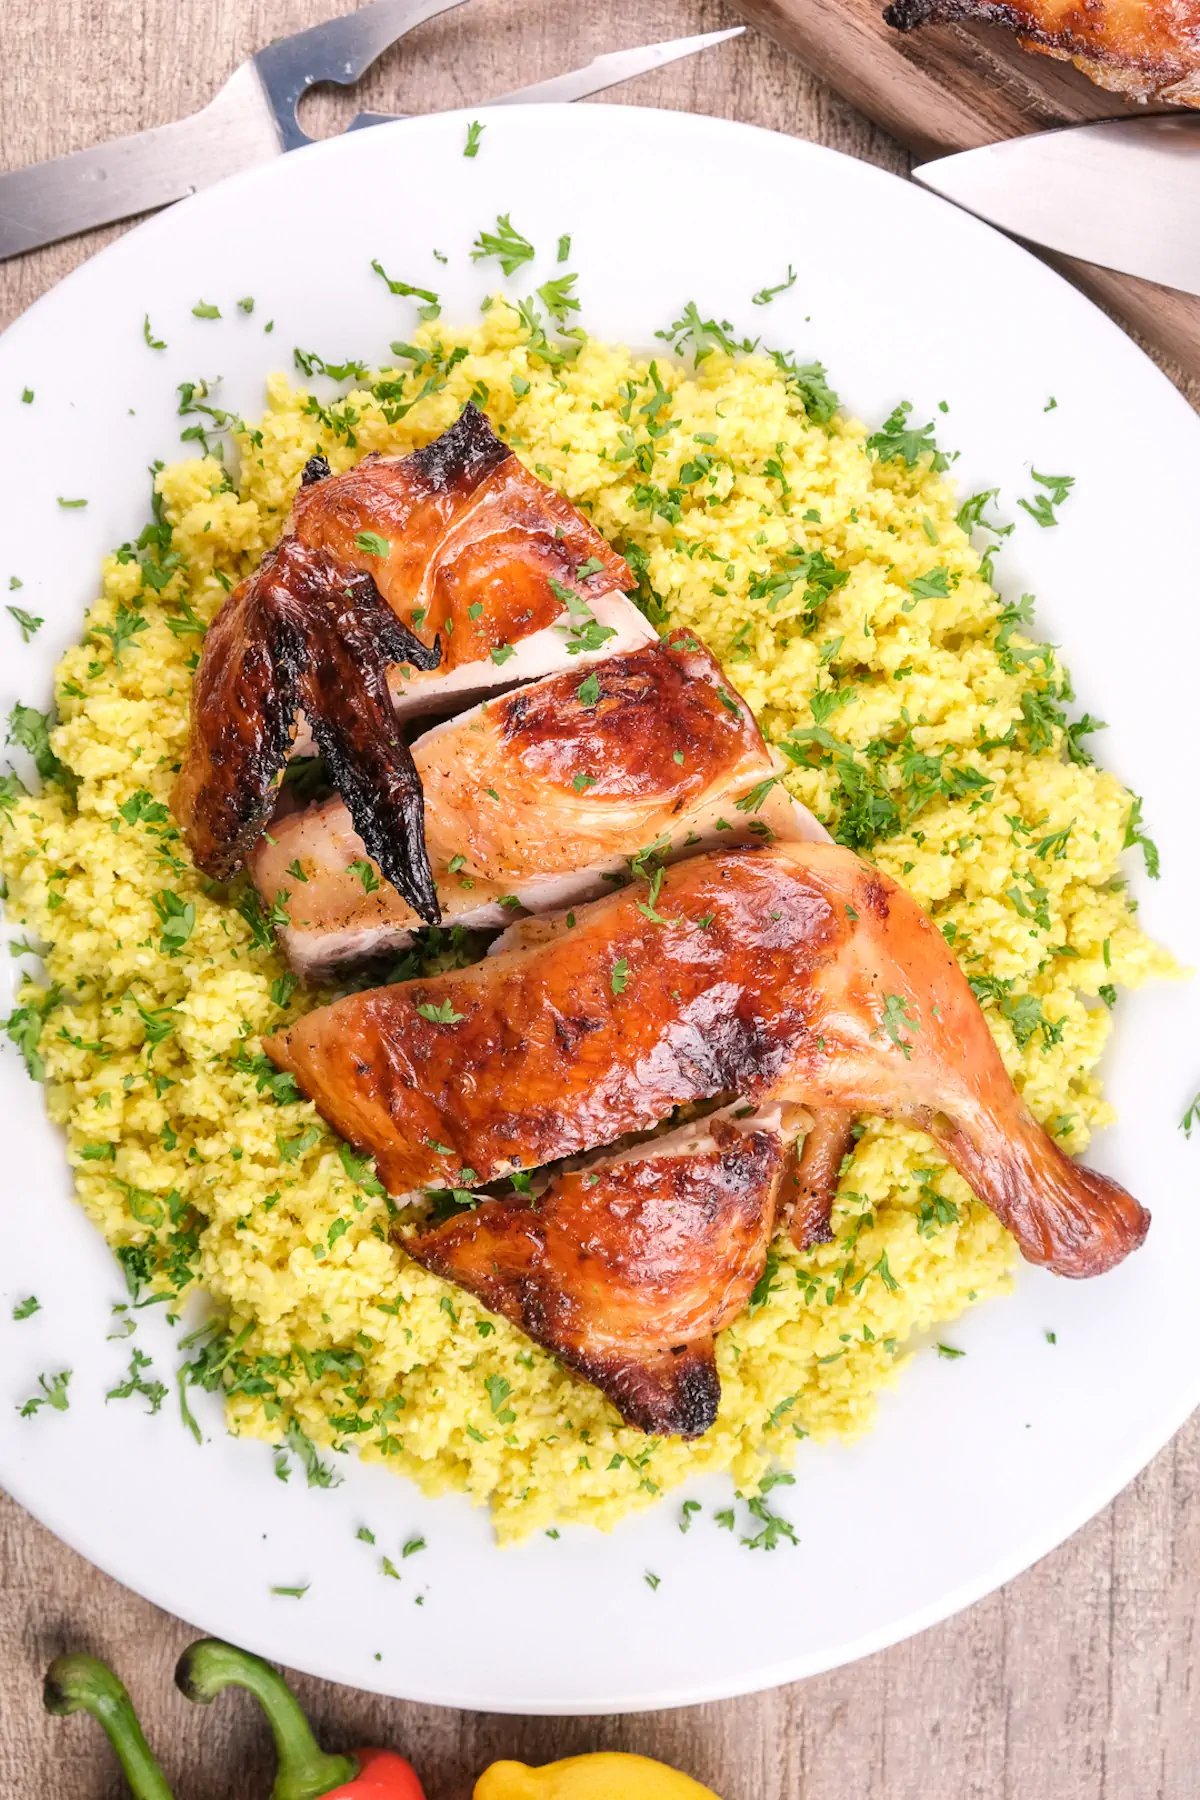 Pollo asado over cauliflower rice, garnished with fresh herbs, served on a plate.